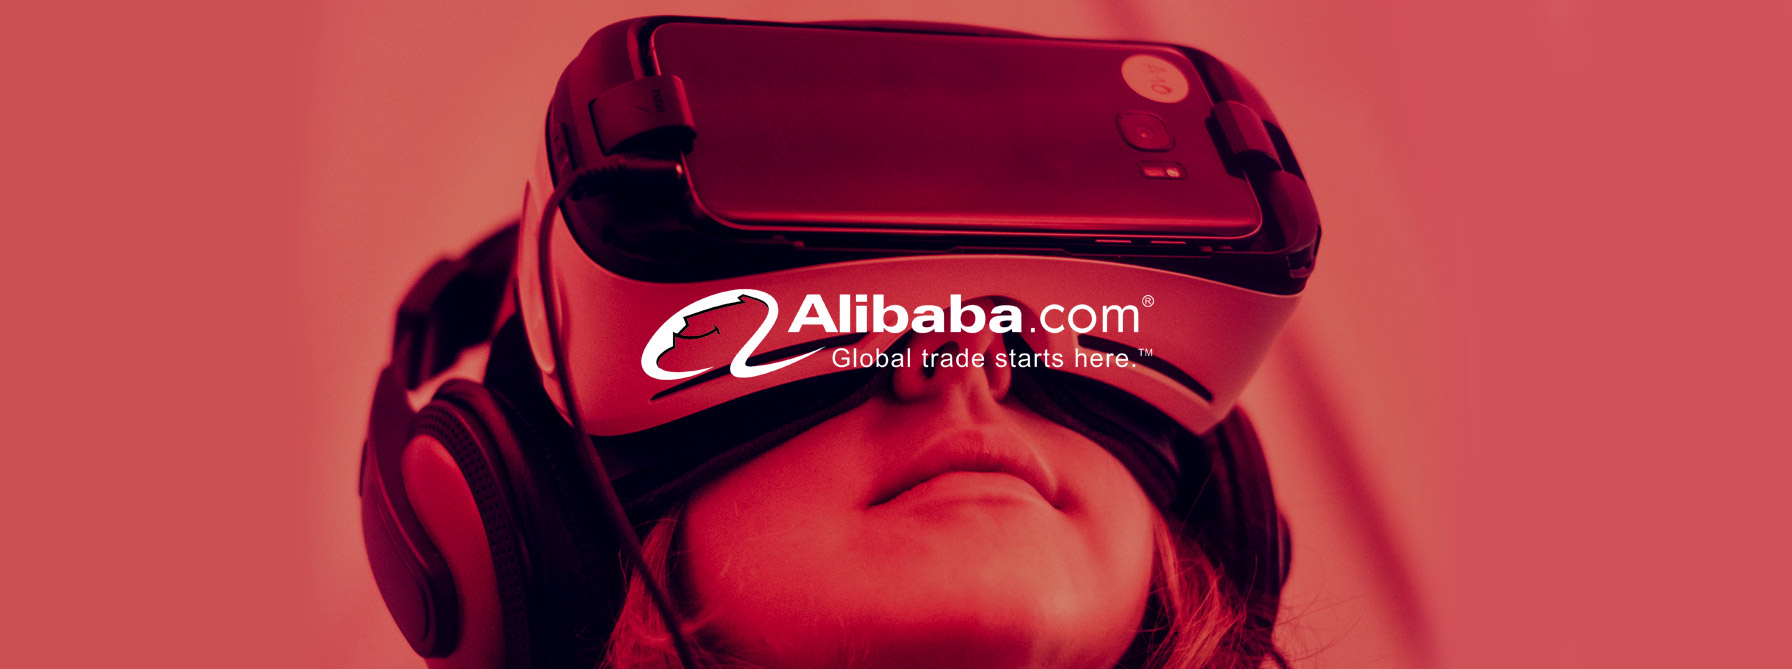 Immersive tech supporting Alibaba's Singles Day